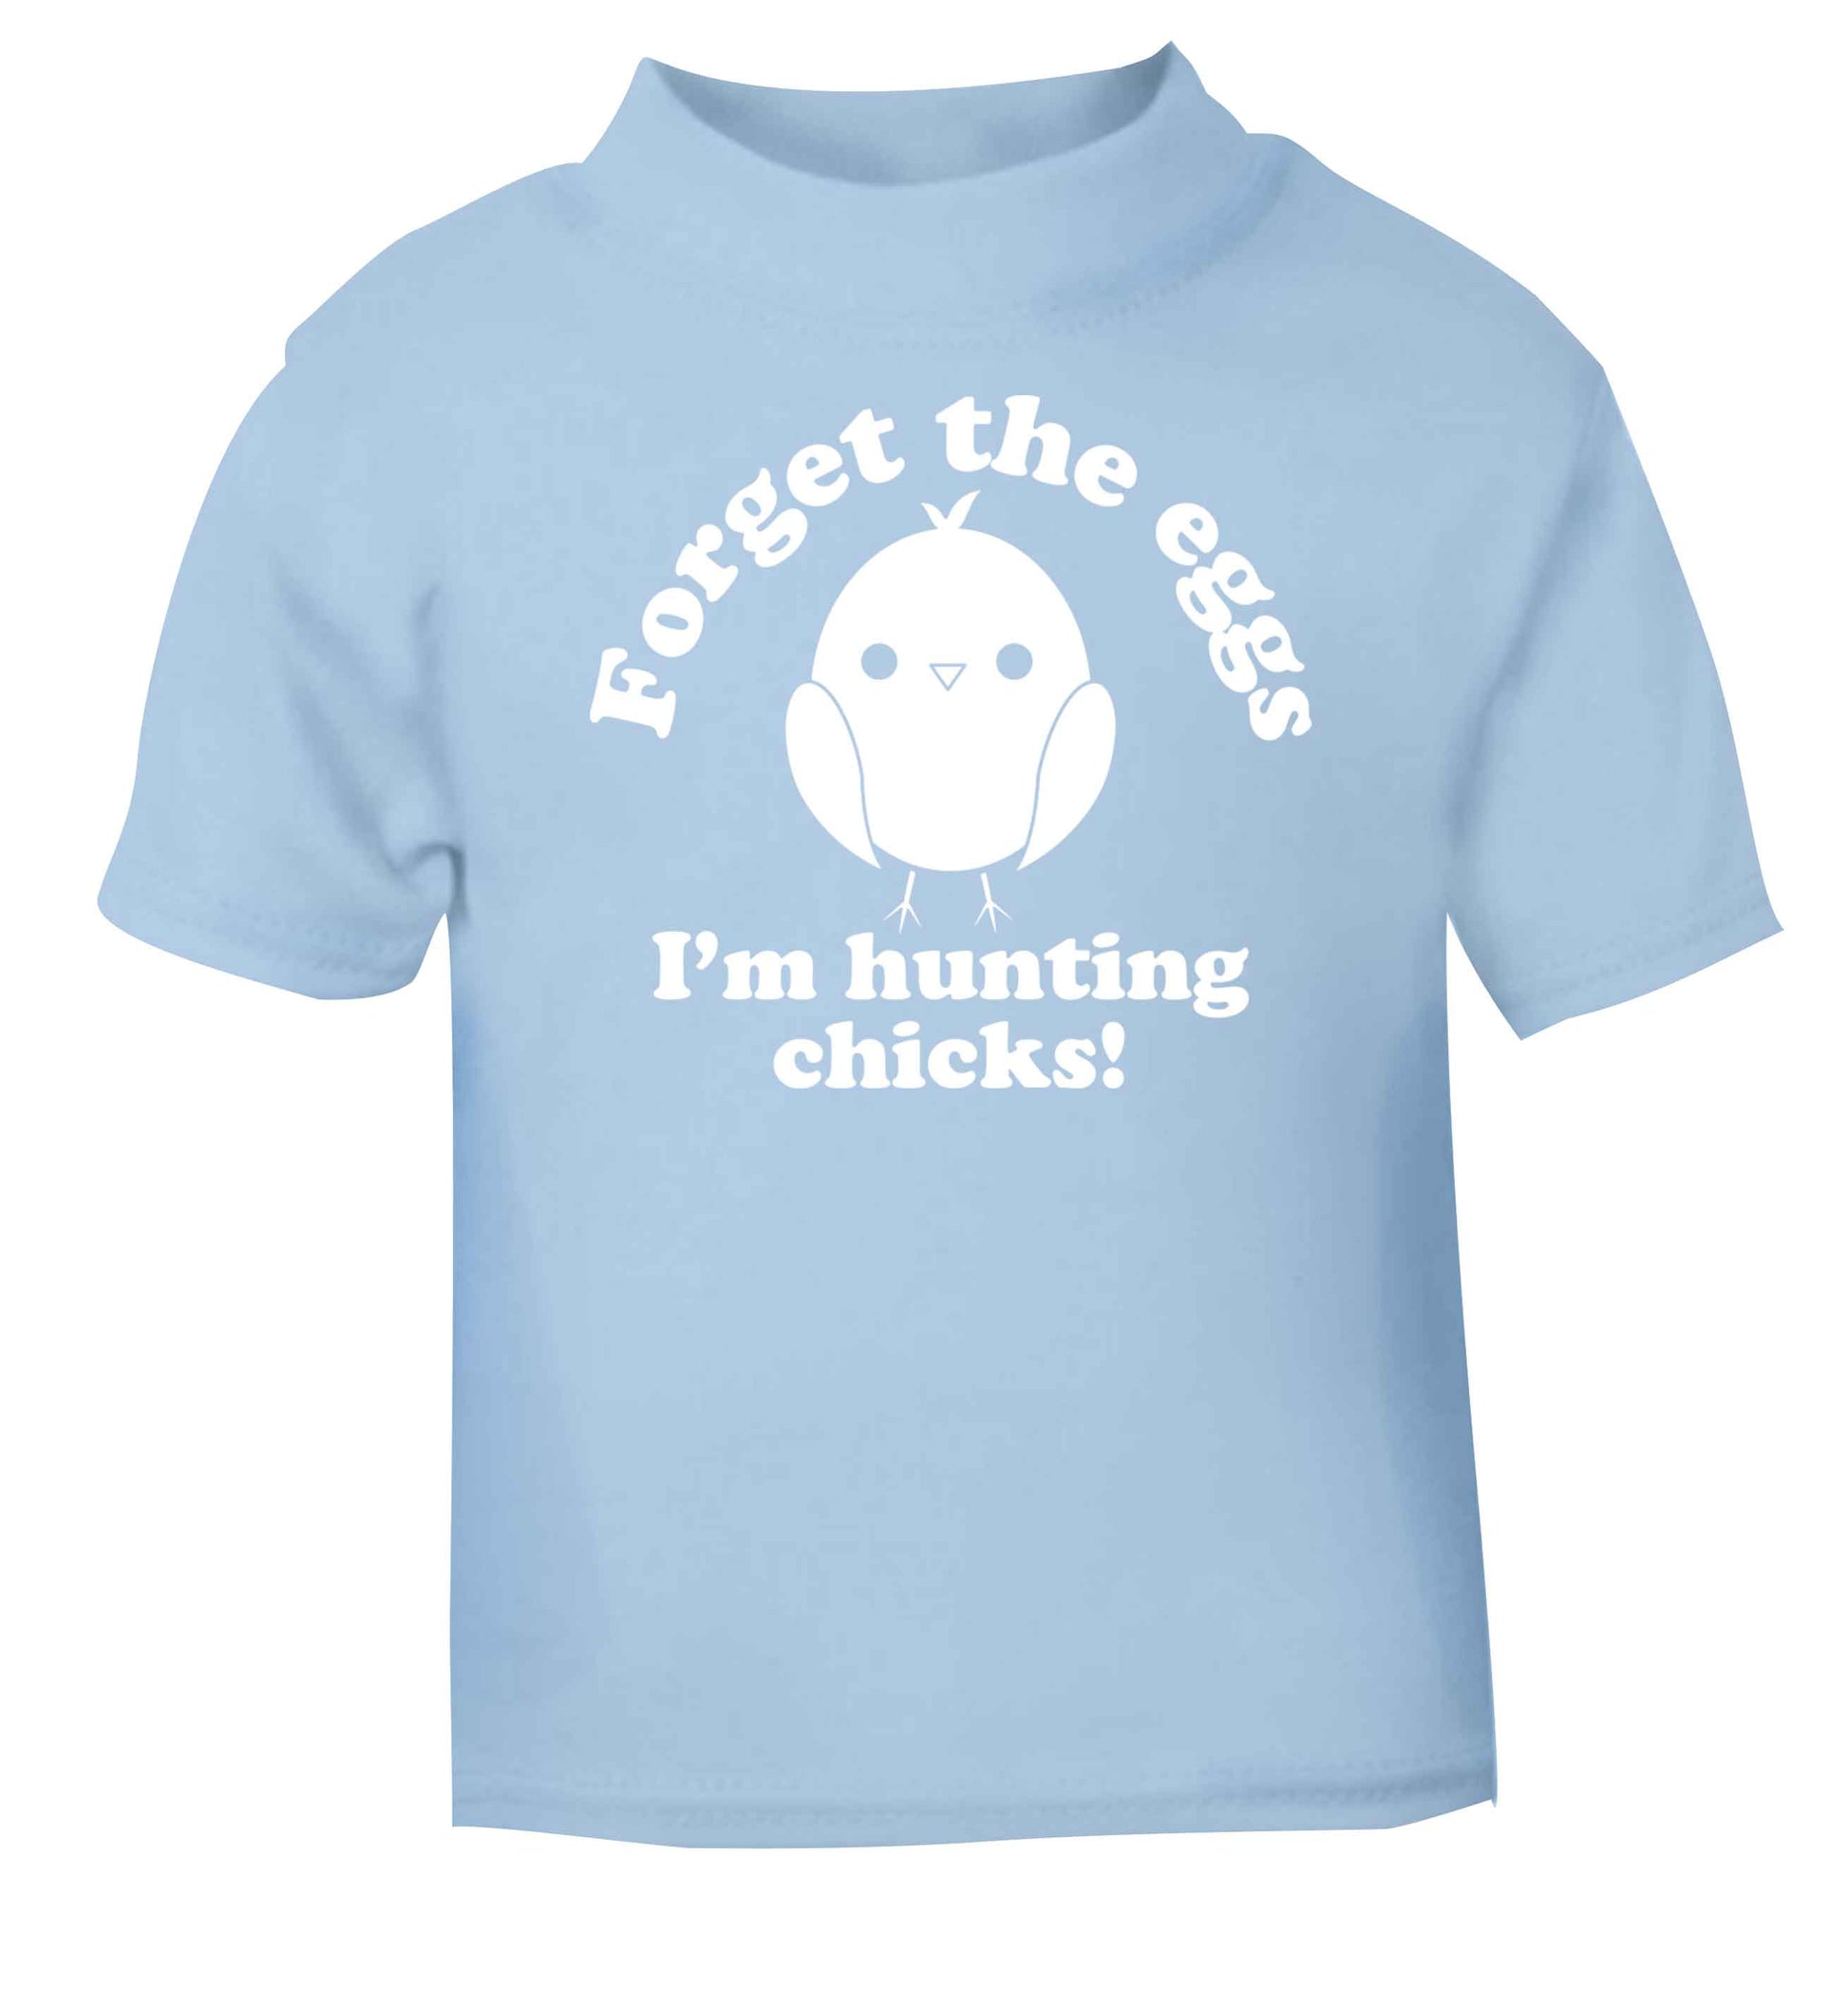 Forget the eggs I'm hunting chicks! light blue baby toddler Tshirt 2 Years